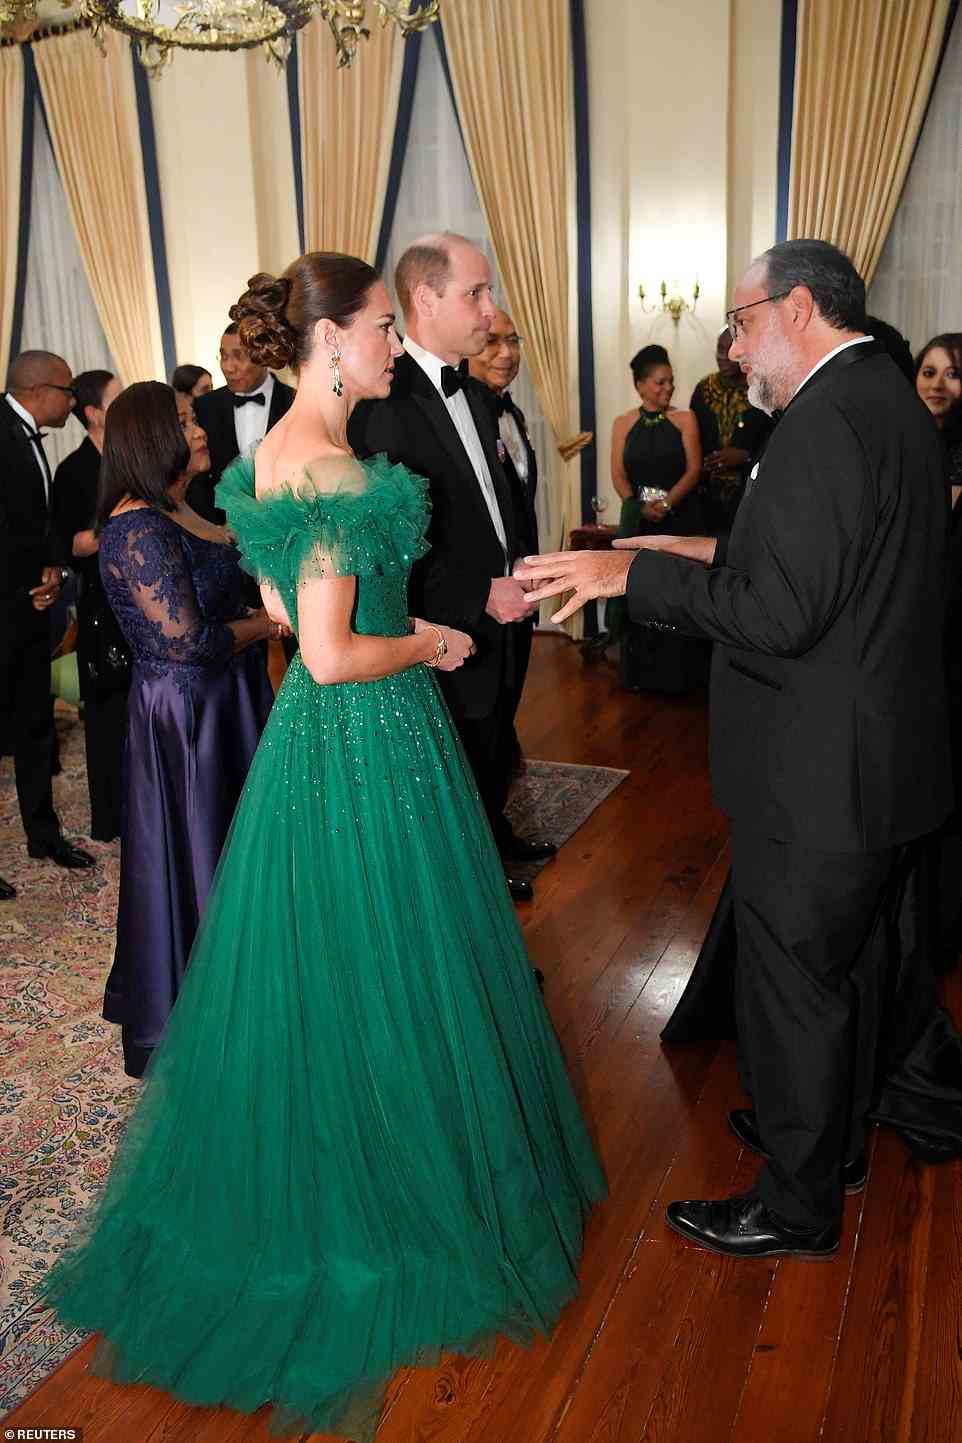 The Duke and Duchess of Cambridge, attend a dinner hosted by the Governor General of Jamaica Patrick Allen and his wife Patricia on the fifth day of their tour of the Caribbean, Kingston, Jamaica